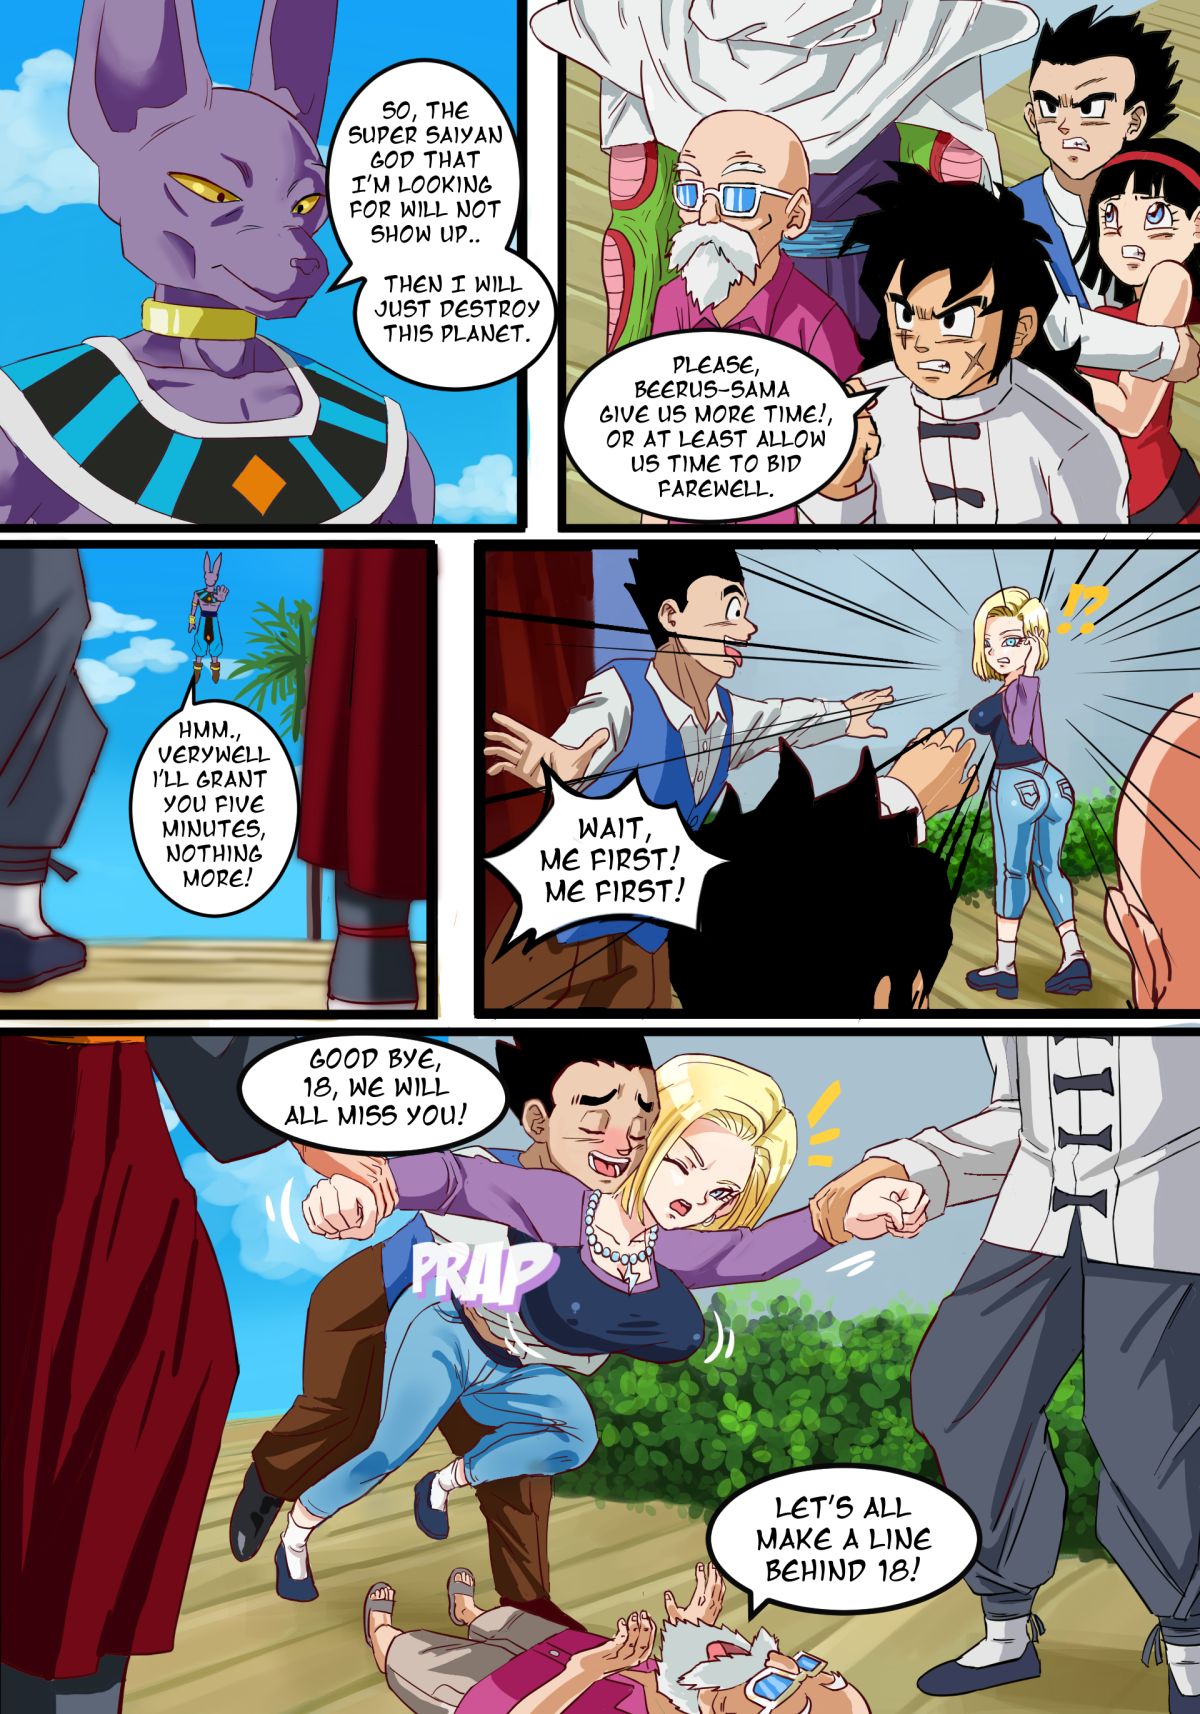 Android 18 And Videl Porn - Pink Pawg] Android 18 Beerus Saga | Porn Comics